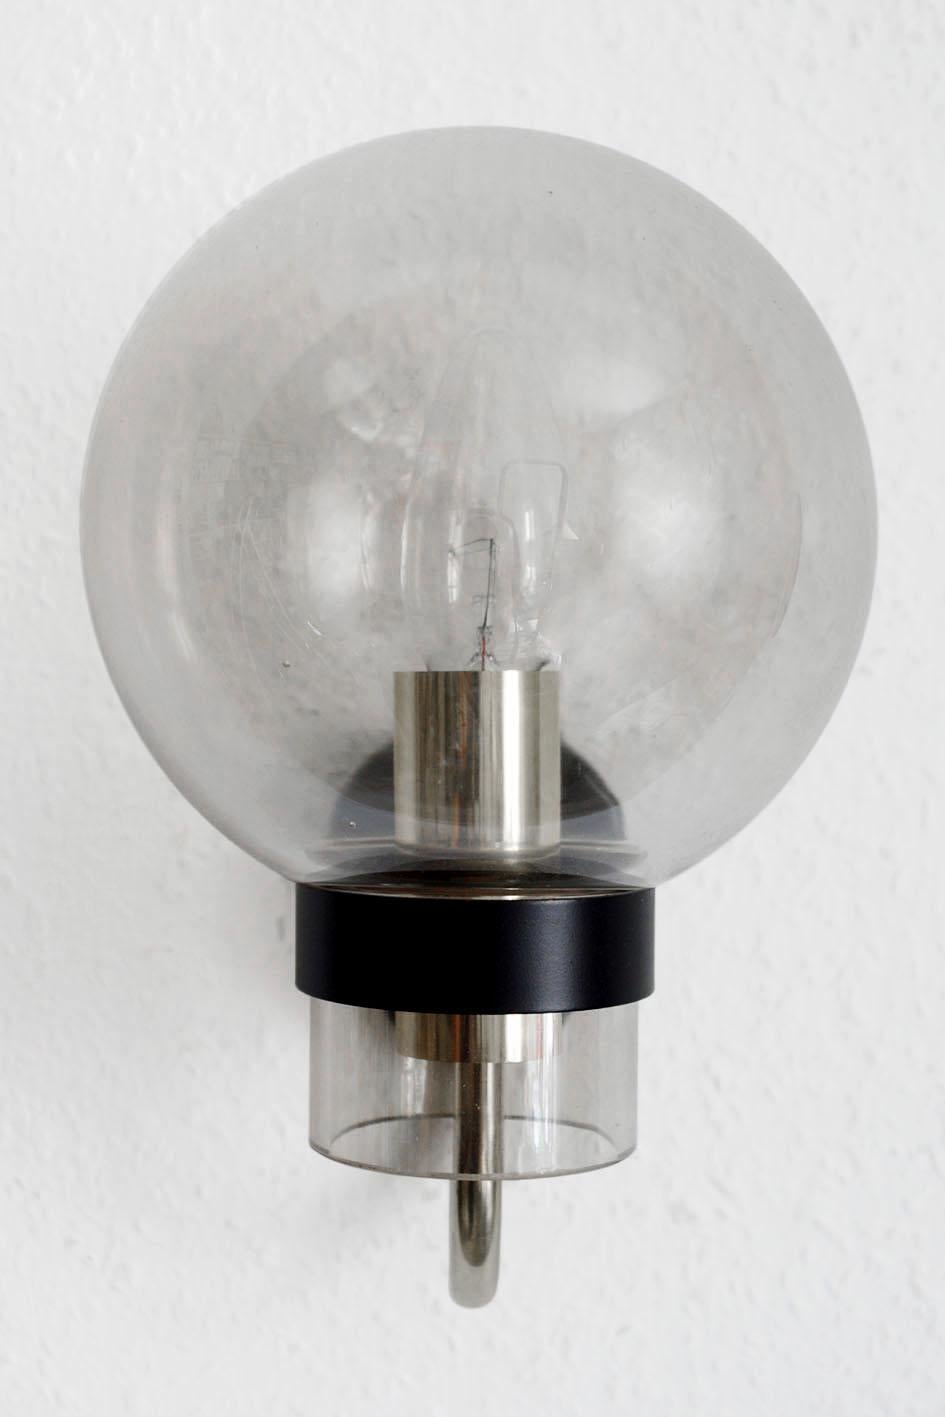 Pair of Rare Modernist Glass Globes Sconces Wall Lamps by Limburg, Germany (Deutsch)